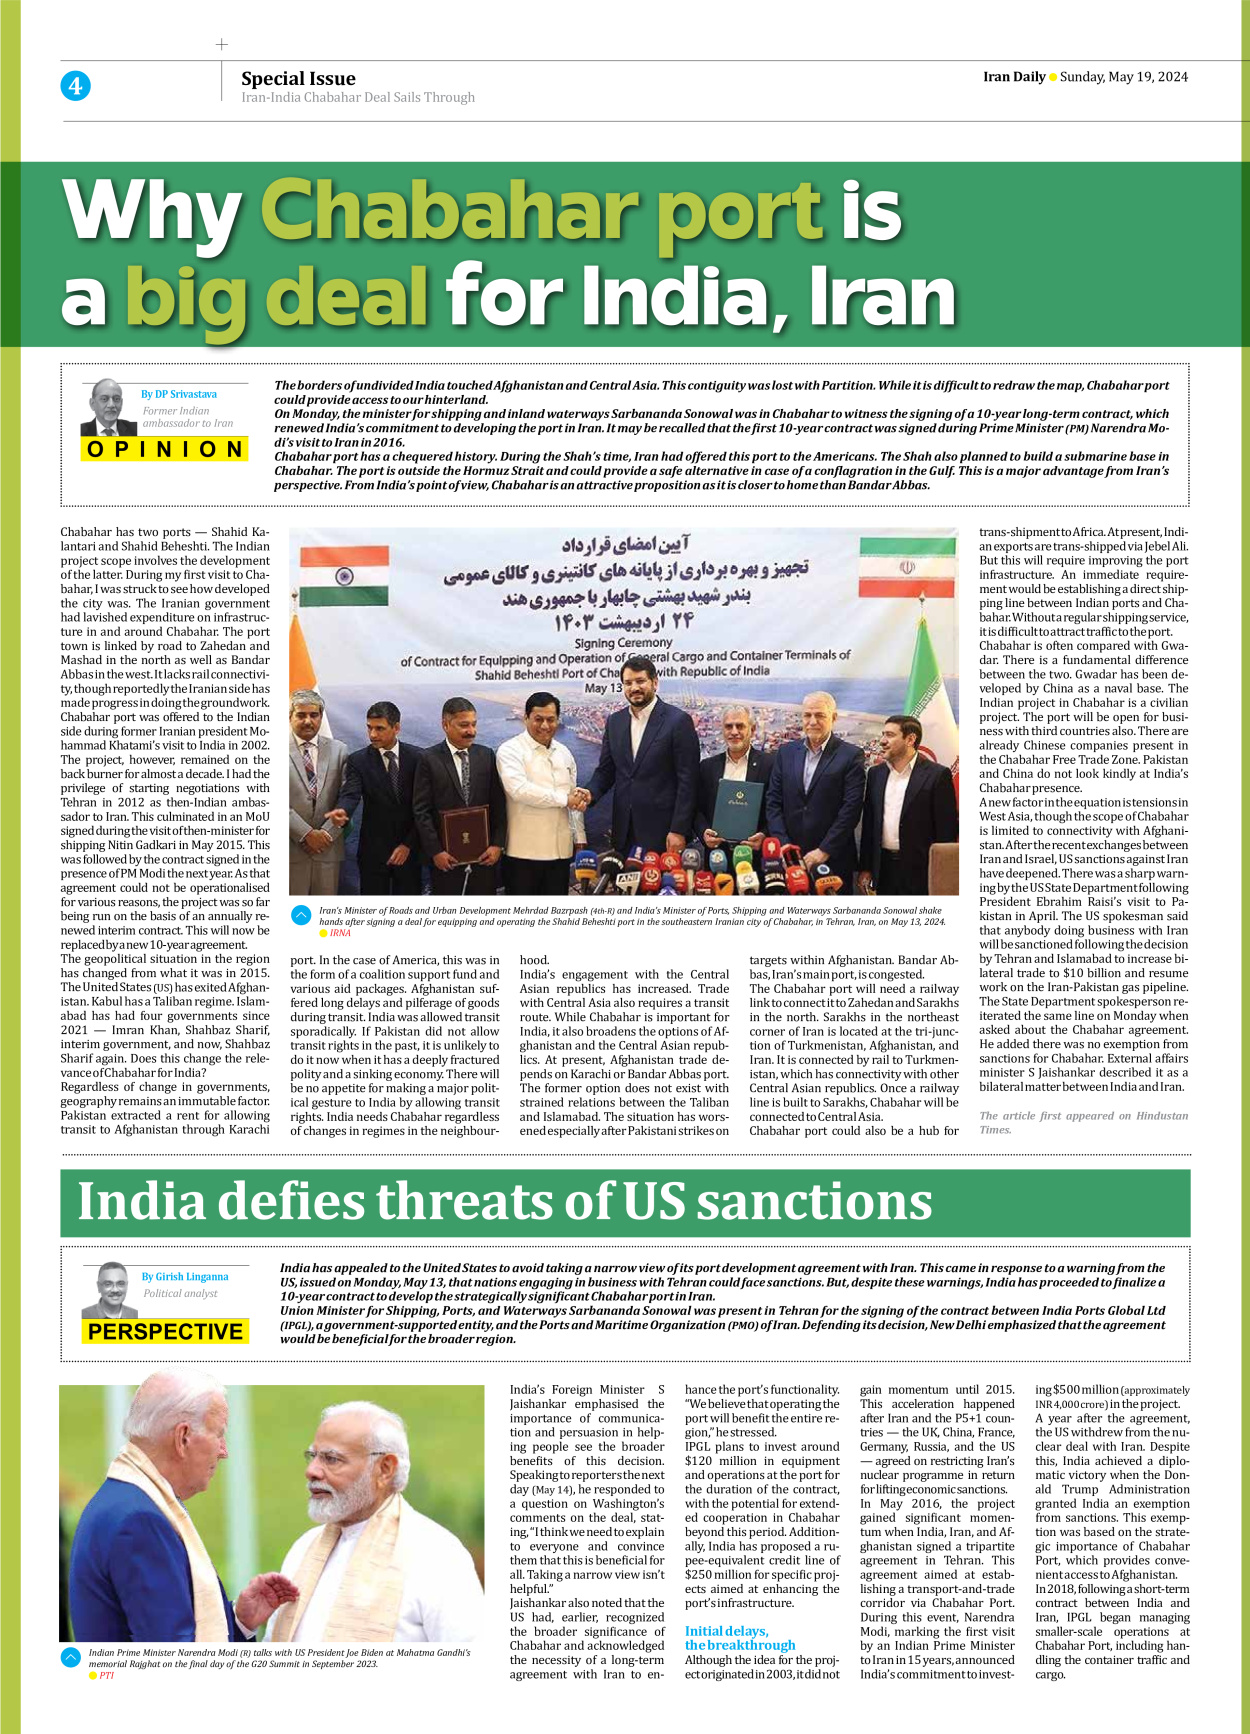 Iran Daily - Number Seven Thousand Five Hundred and Sixty One - 19 May 2024 - Page 4